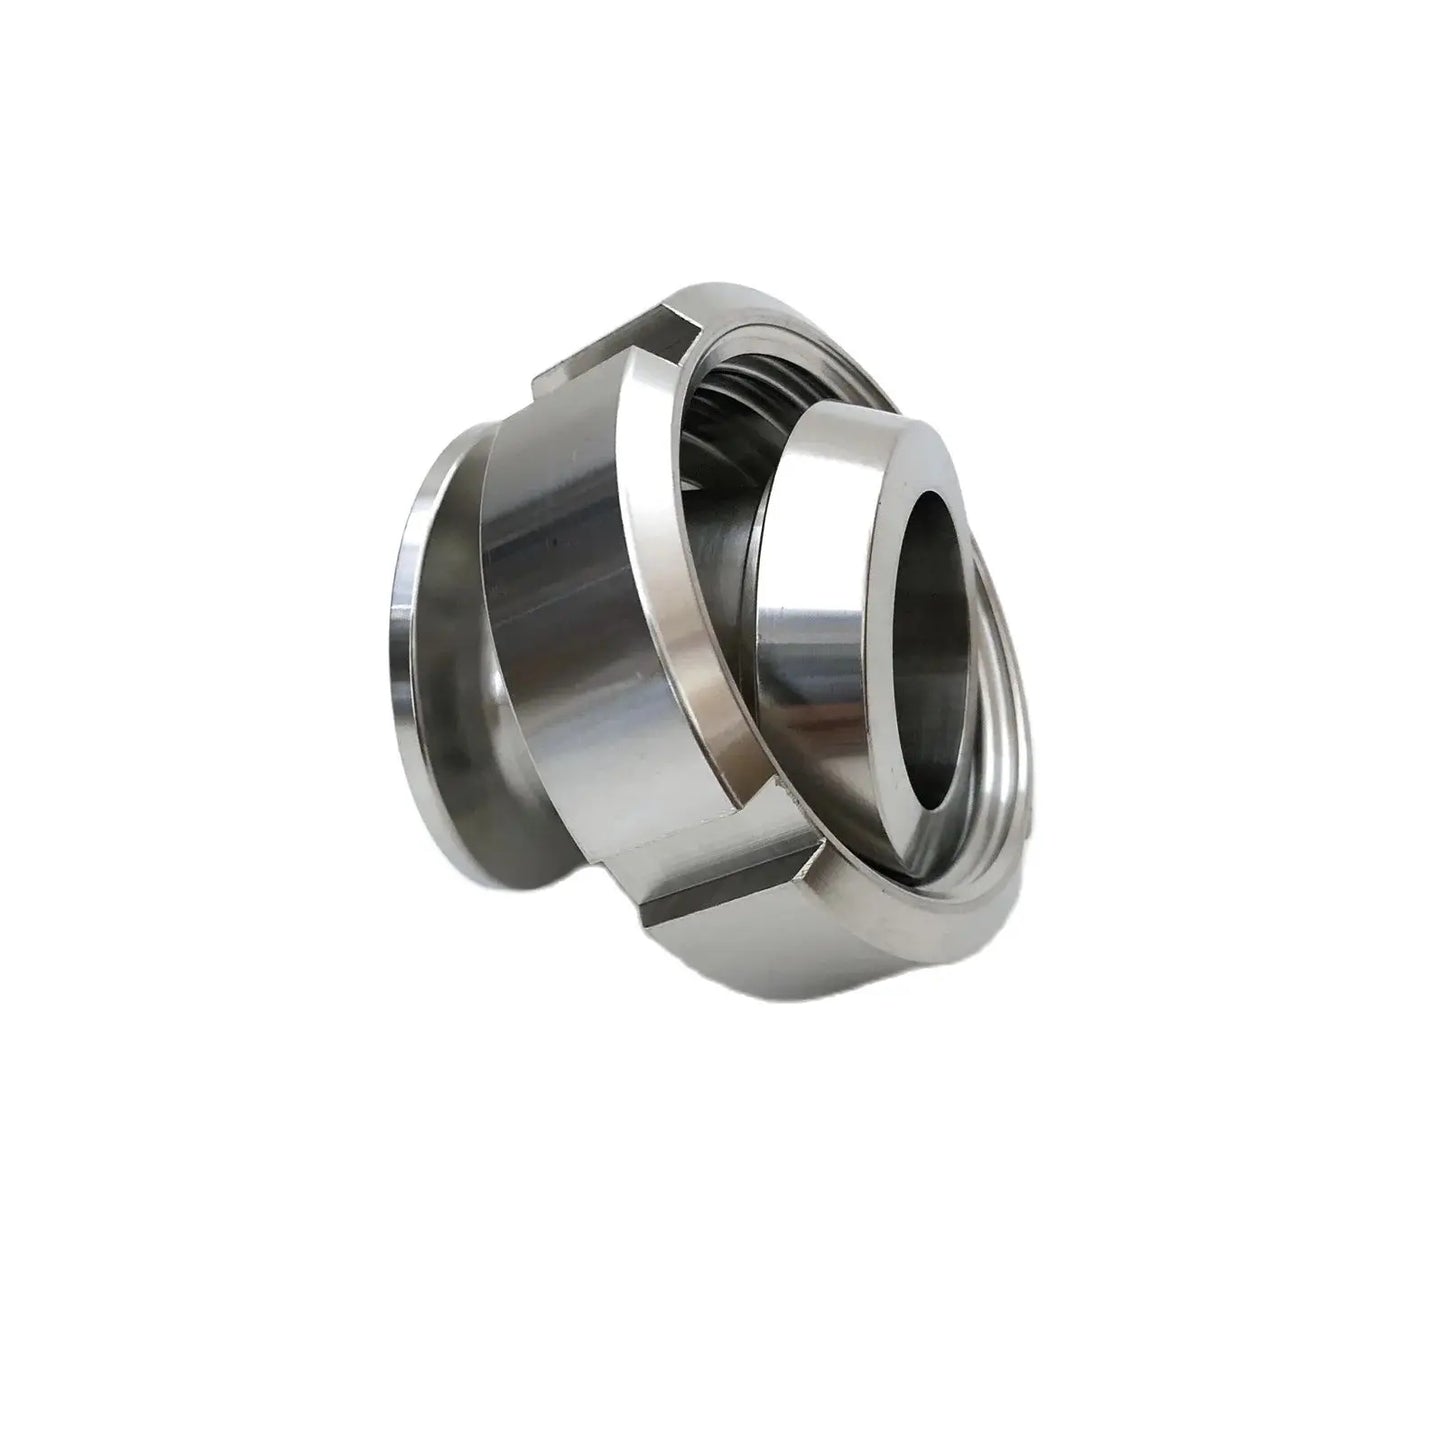 Stainless Steel SS316L Tri Clamp to DIN11851 Sanitary Fitting 1.5" Tri Clamp to Welding Liner & Nut Adapter